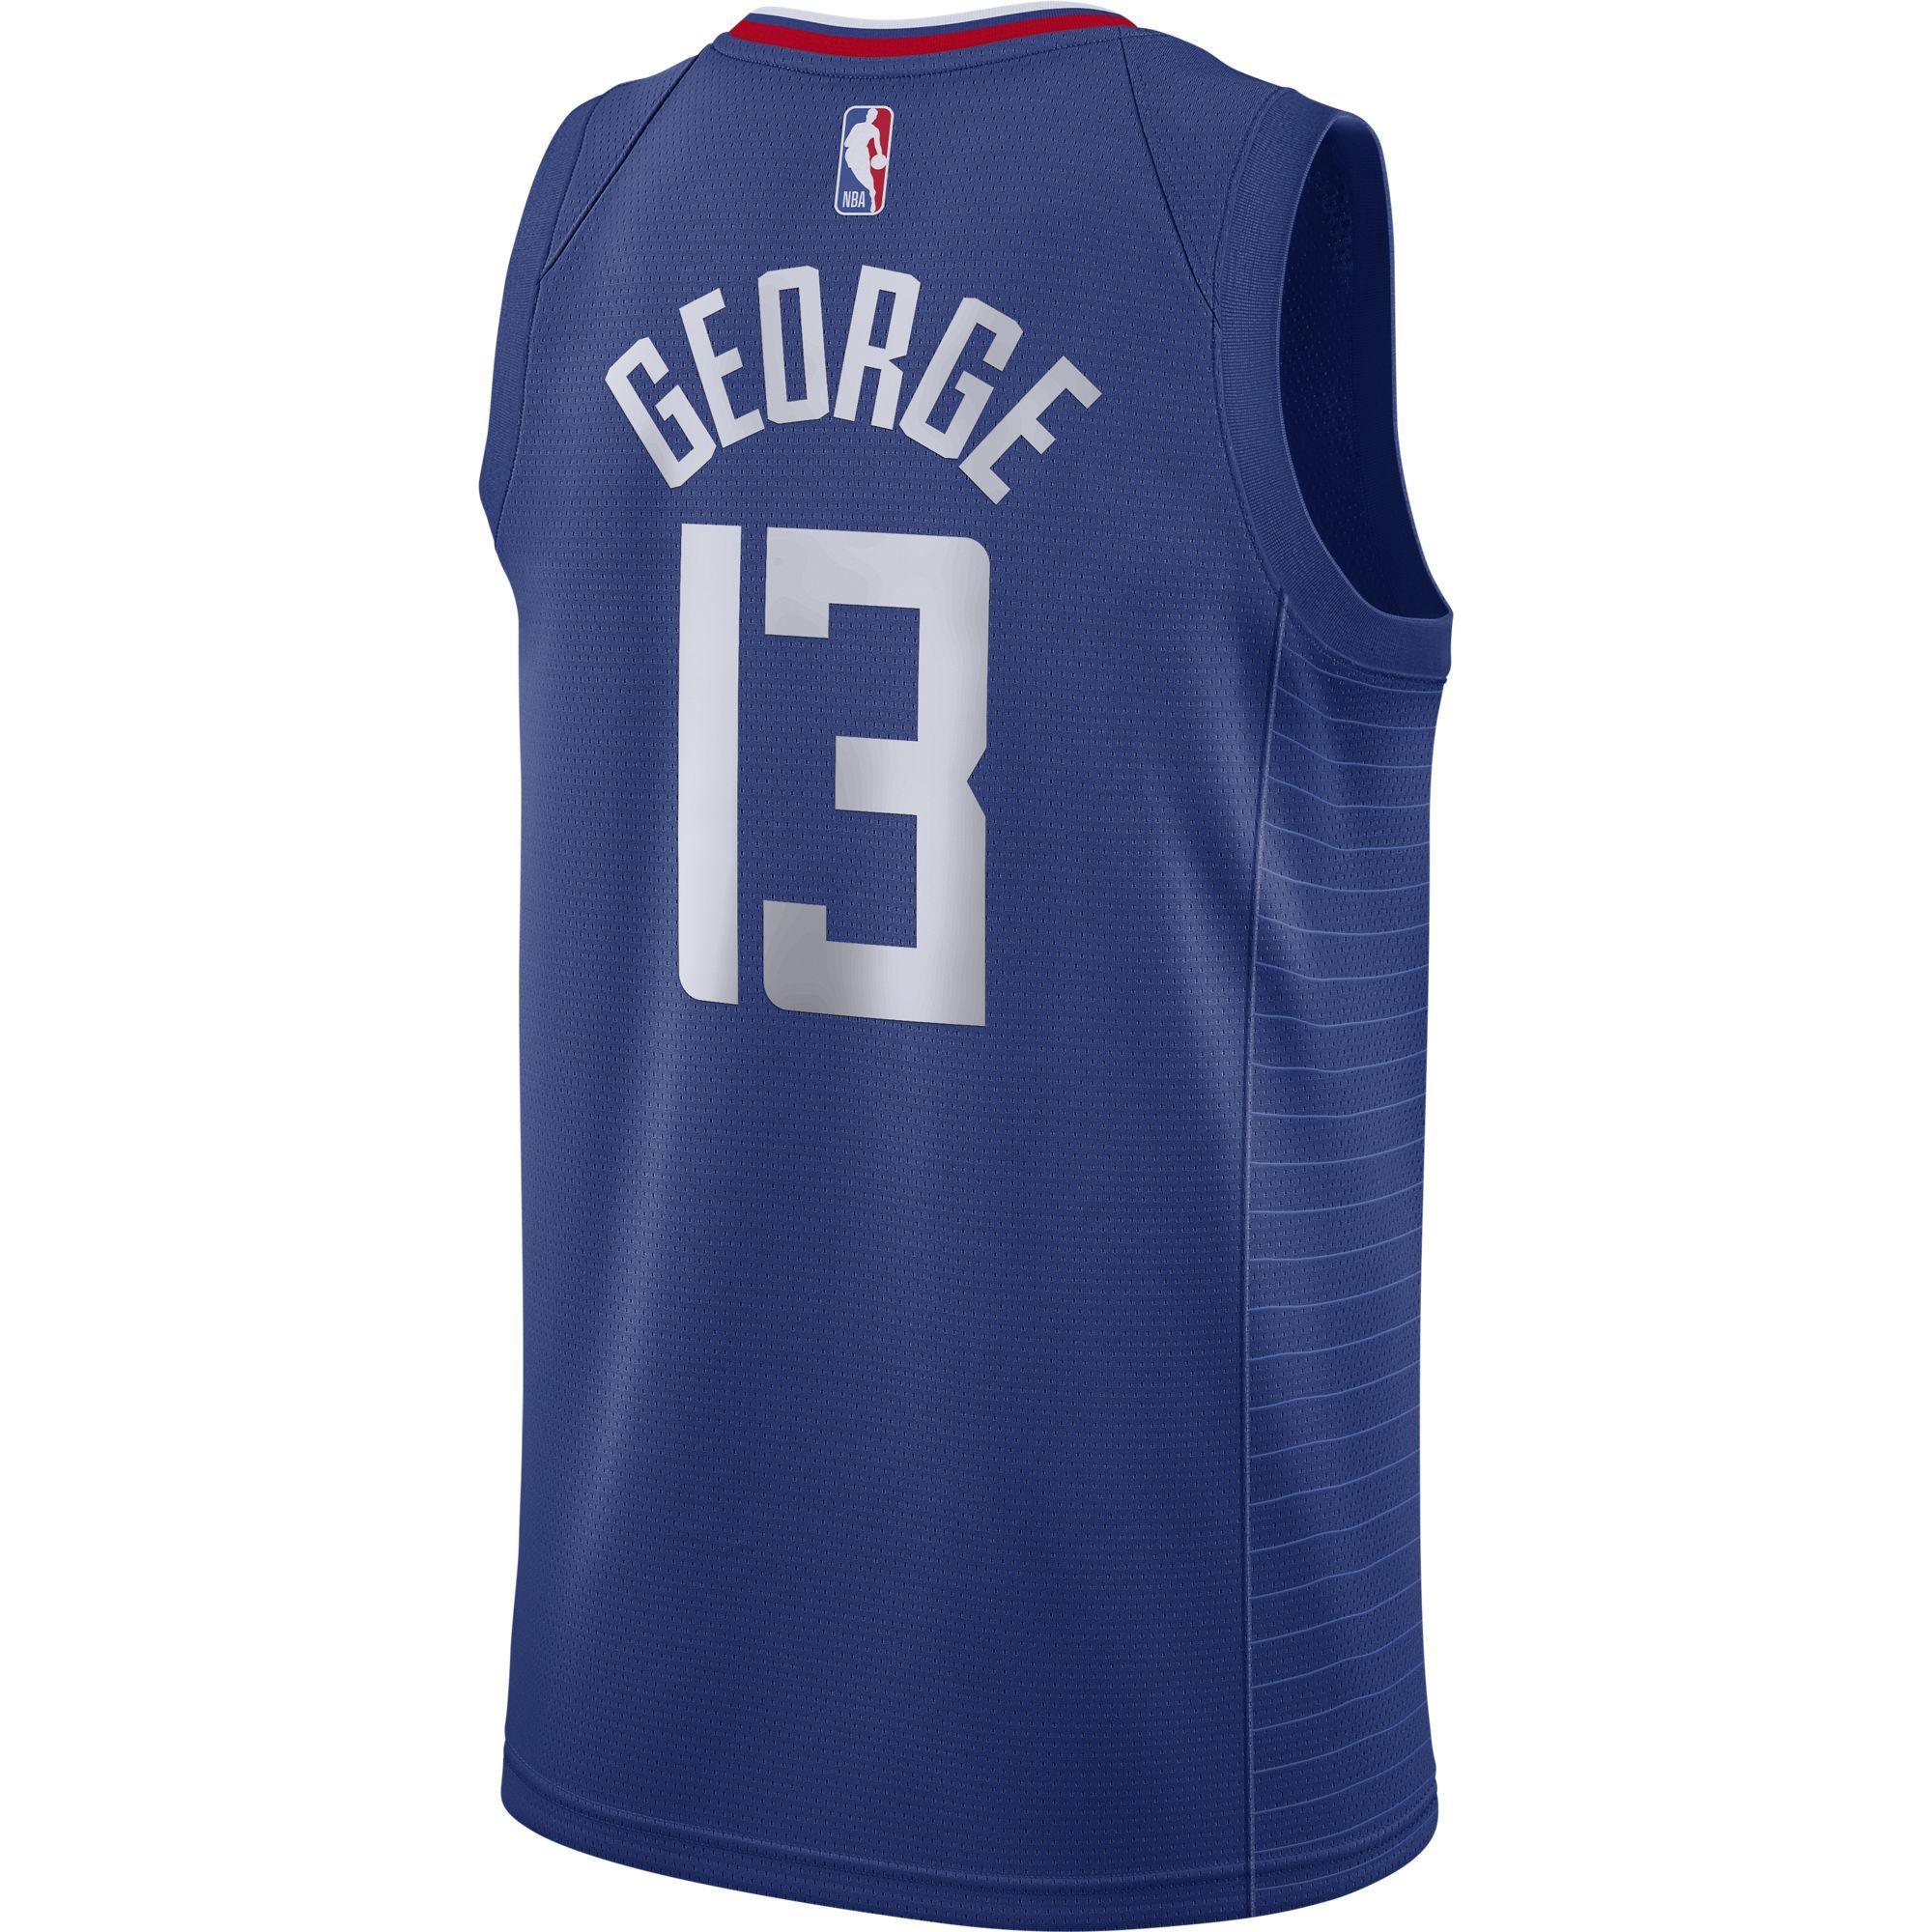 paul george los angeles clippers jersey